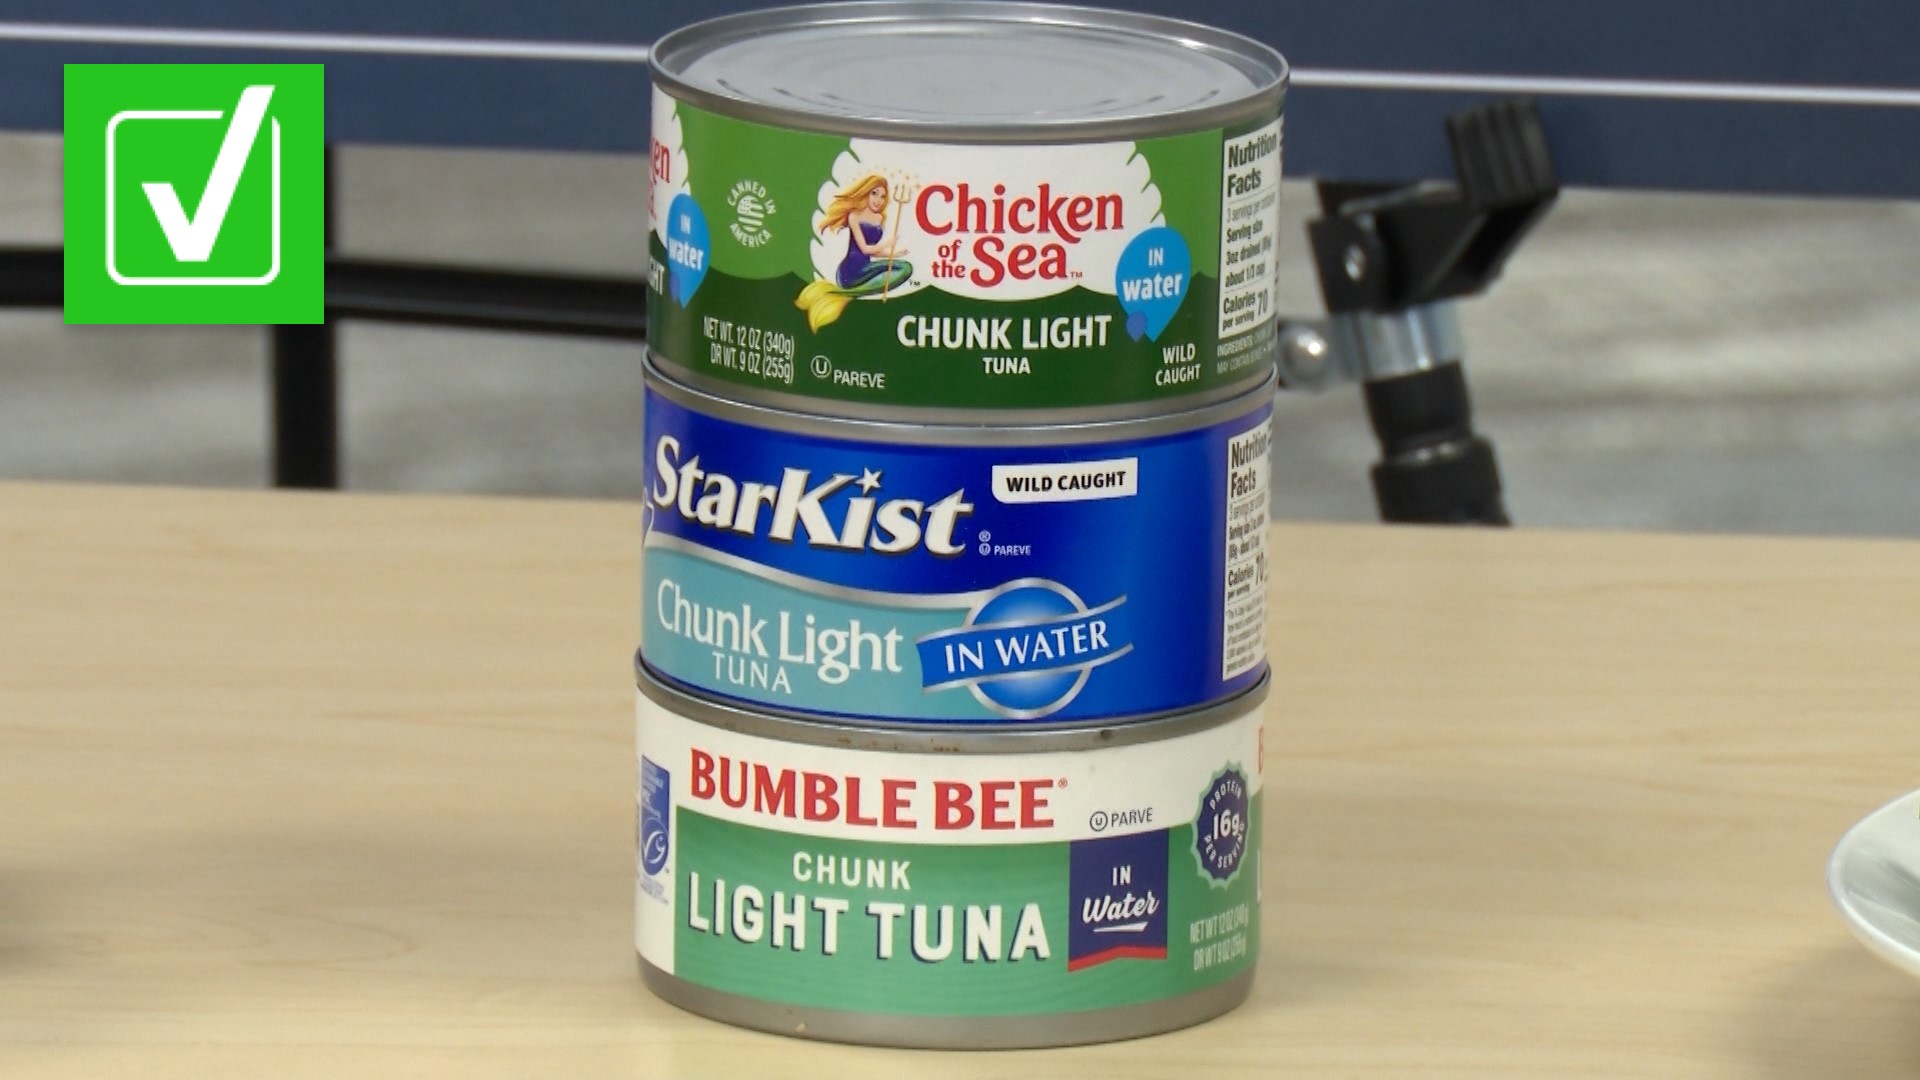 Washington's Attorney General sent the checks to 400,000 households as part of price-fixing cases against chicken and tuna producers.